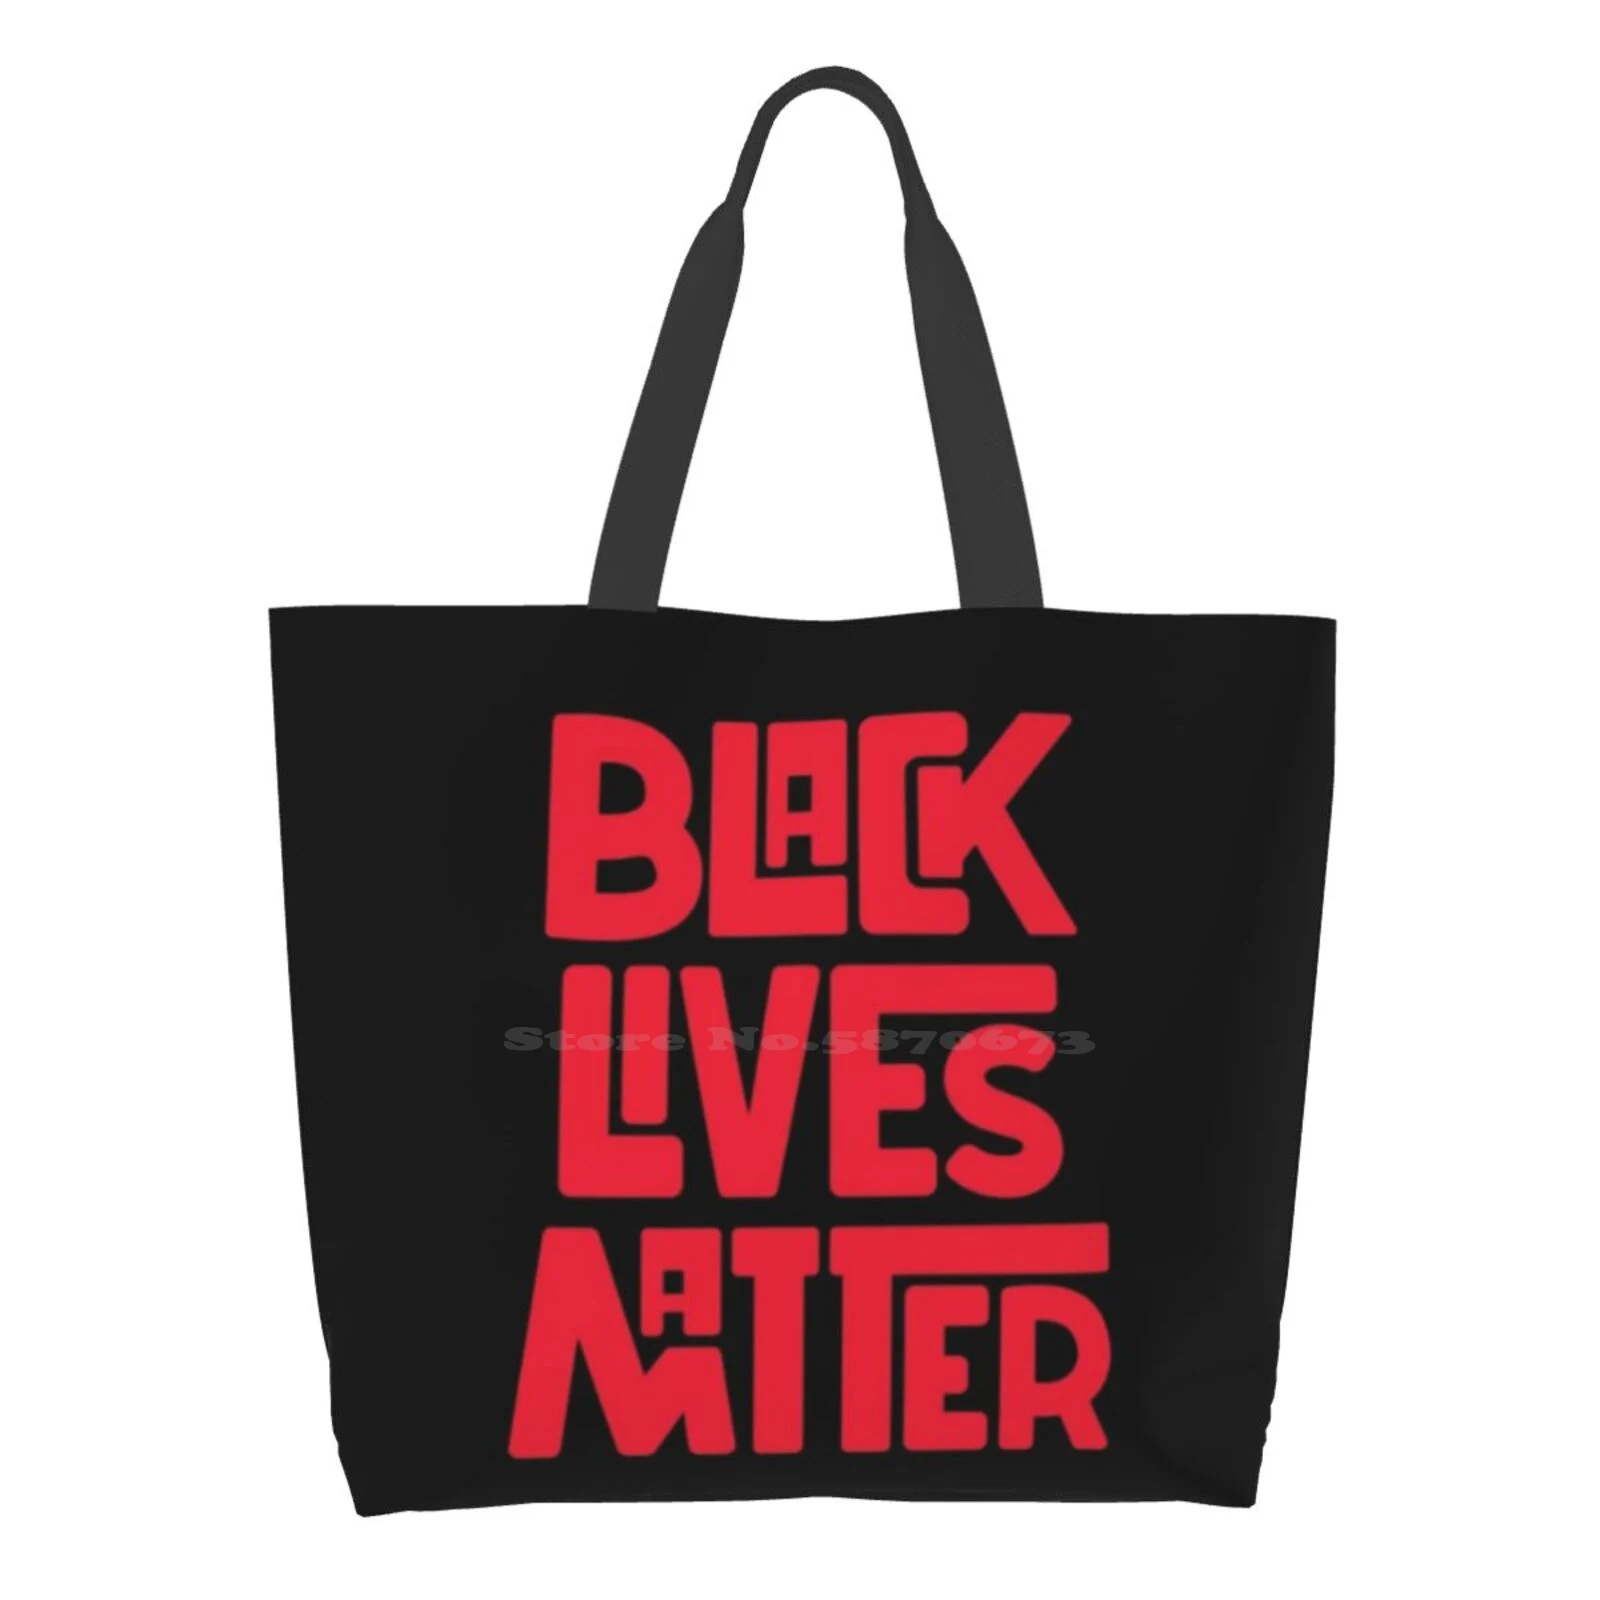 

Red Black Live Matter And S Th Shopping Bags Girls Fashion Casual Pacakge Hand Bag Black Lives Matter Black Lives Matter Black